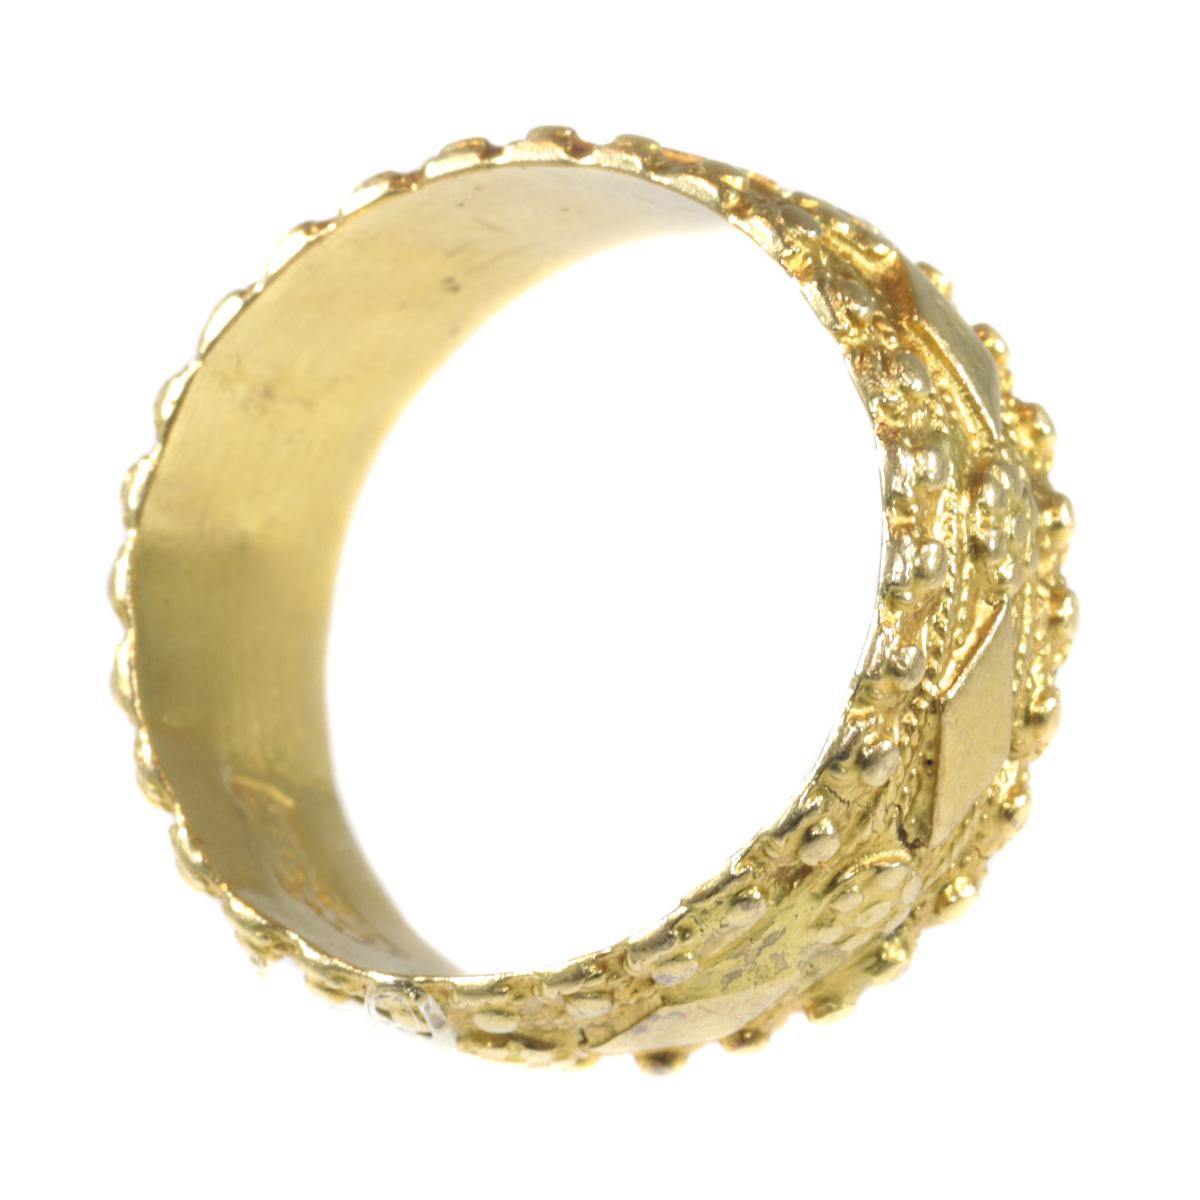 Women's or Men's Late 18th Century Rococo Dutch Gold Ring with Amsterdam Hallmarks, 1780s For Sale